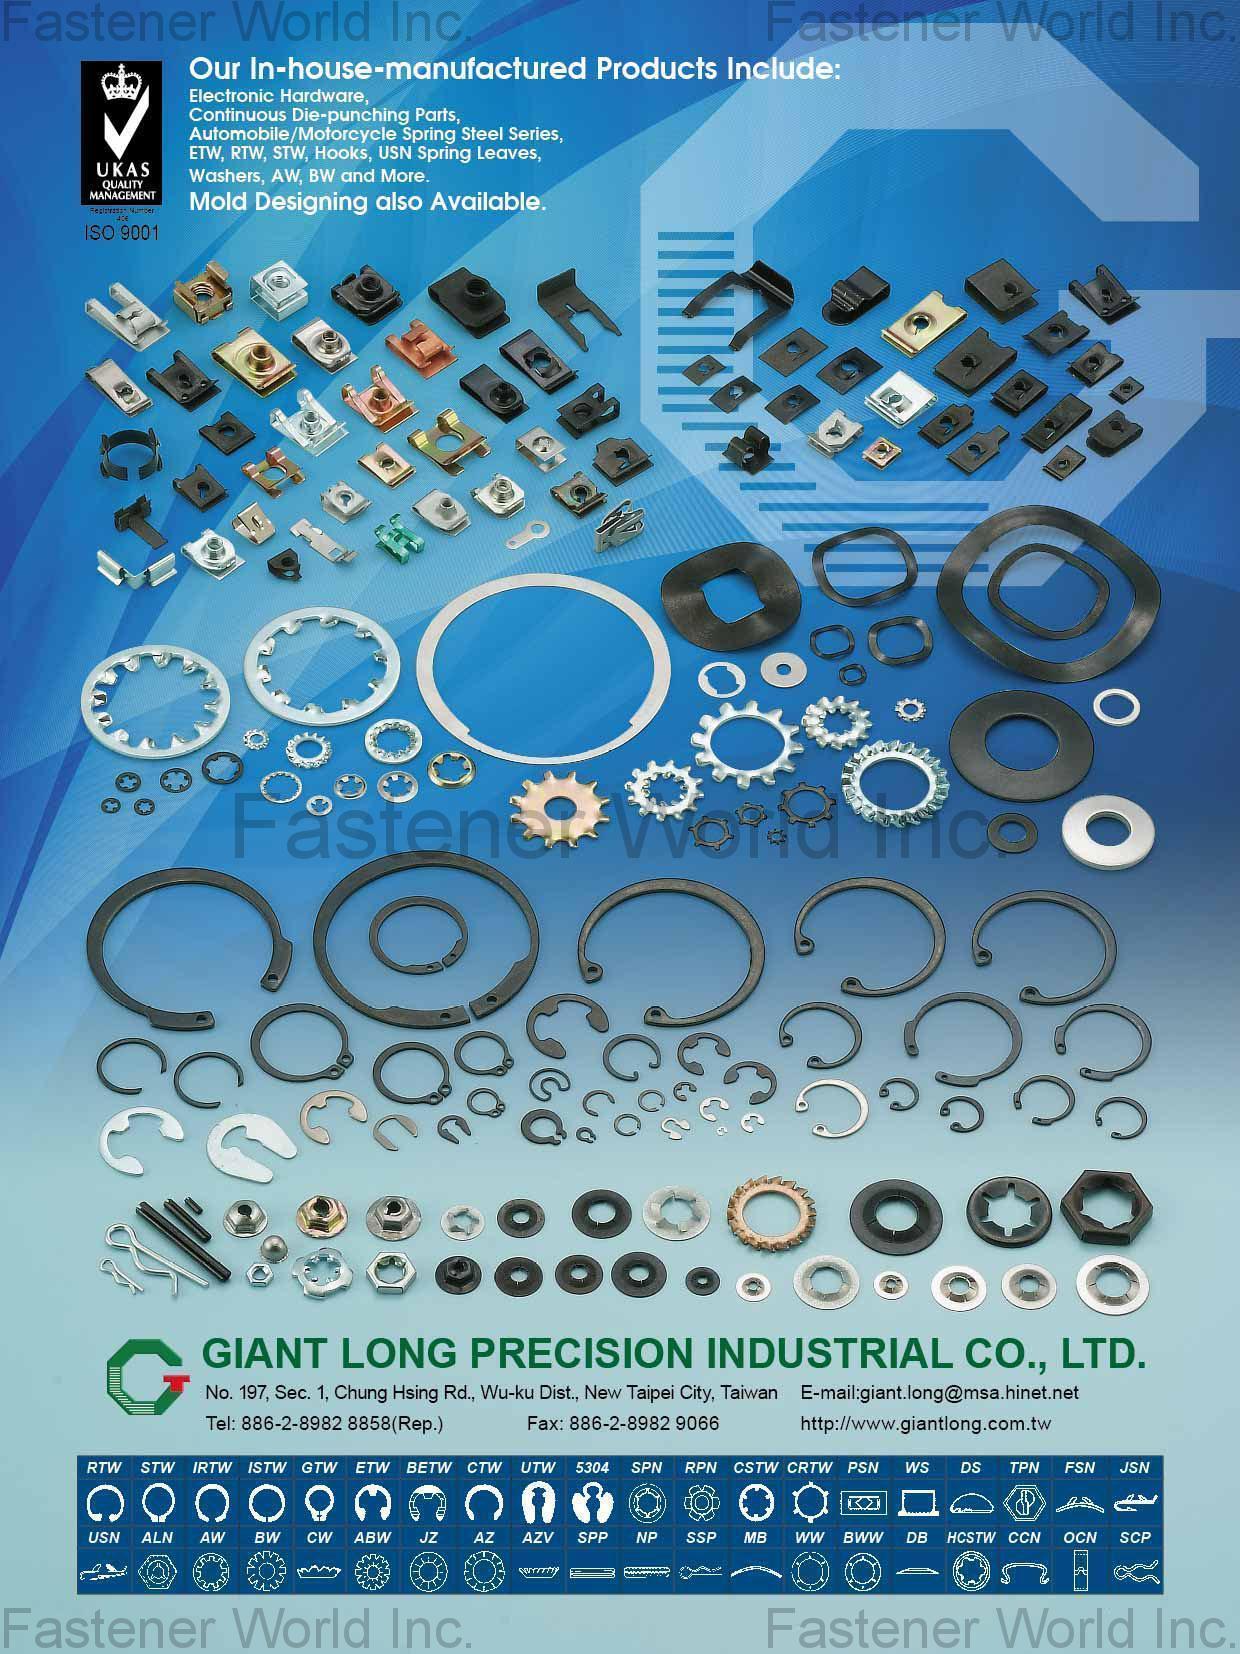 SHOU LONG PRECISION INDUSTRIAL CO., LTD. (GIANT LONG) , Toothed Washers,Square Washers,Vibration Dampening Washers,Washers,Galvanized Washers,Zinc Washers,Arc Washers,Chrome Plated Washers,Flush Washers, , Custom Washers